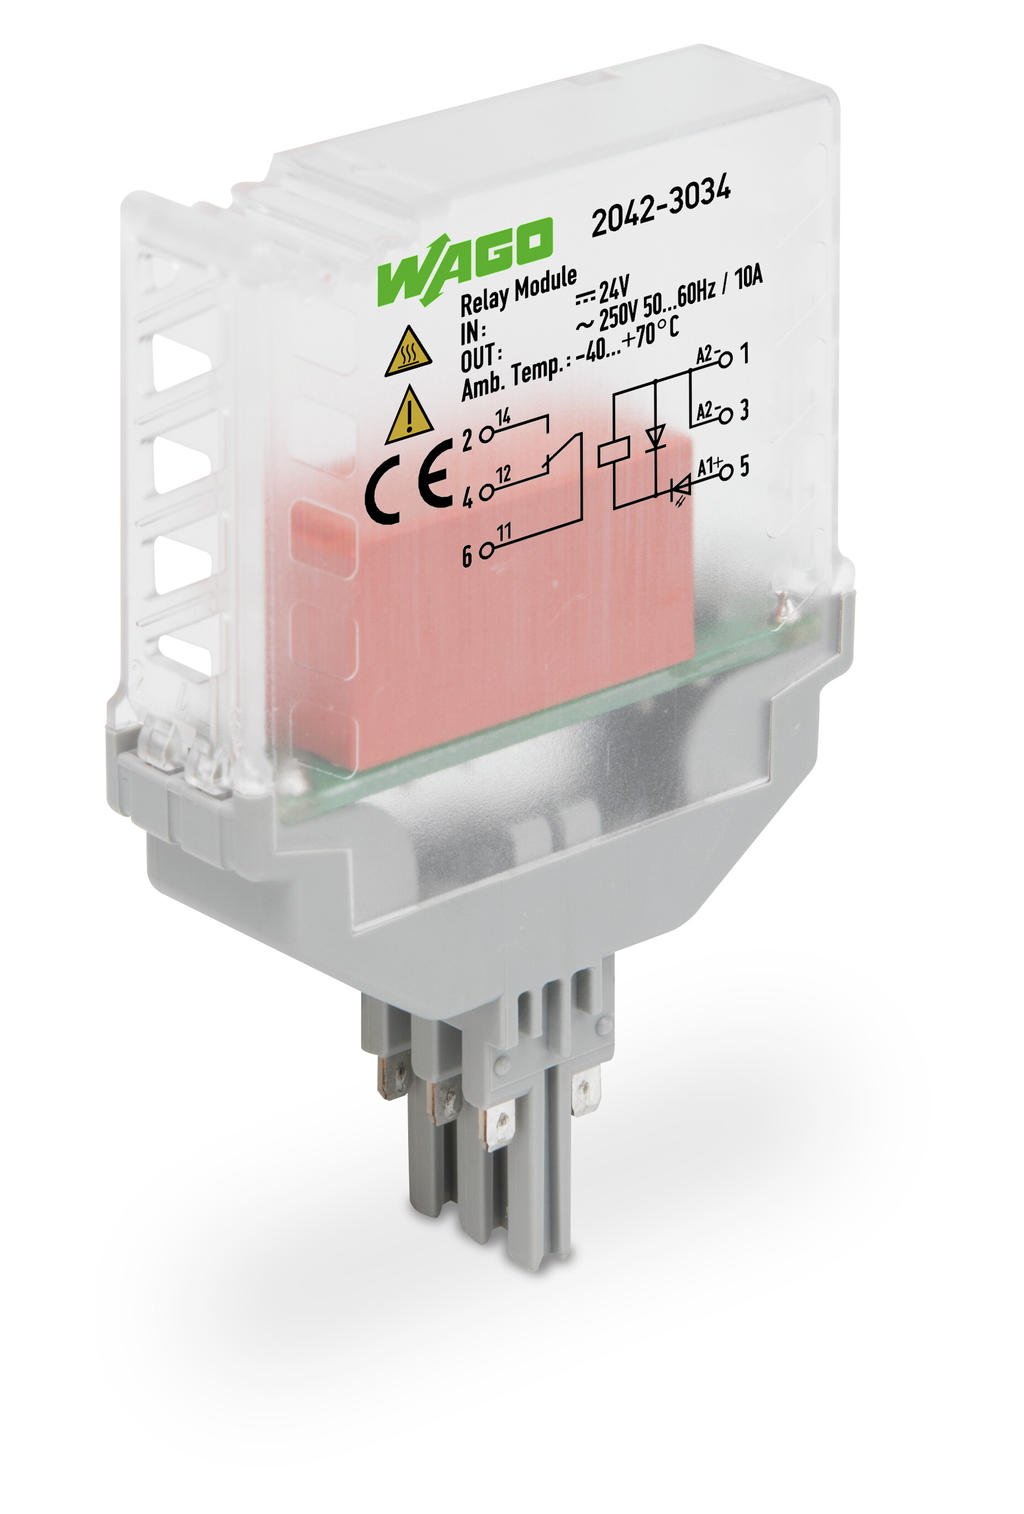 Solid-state relay module